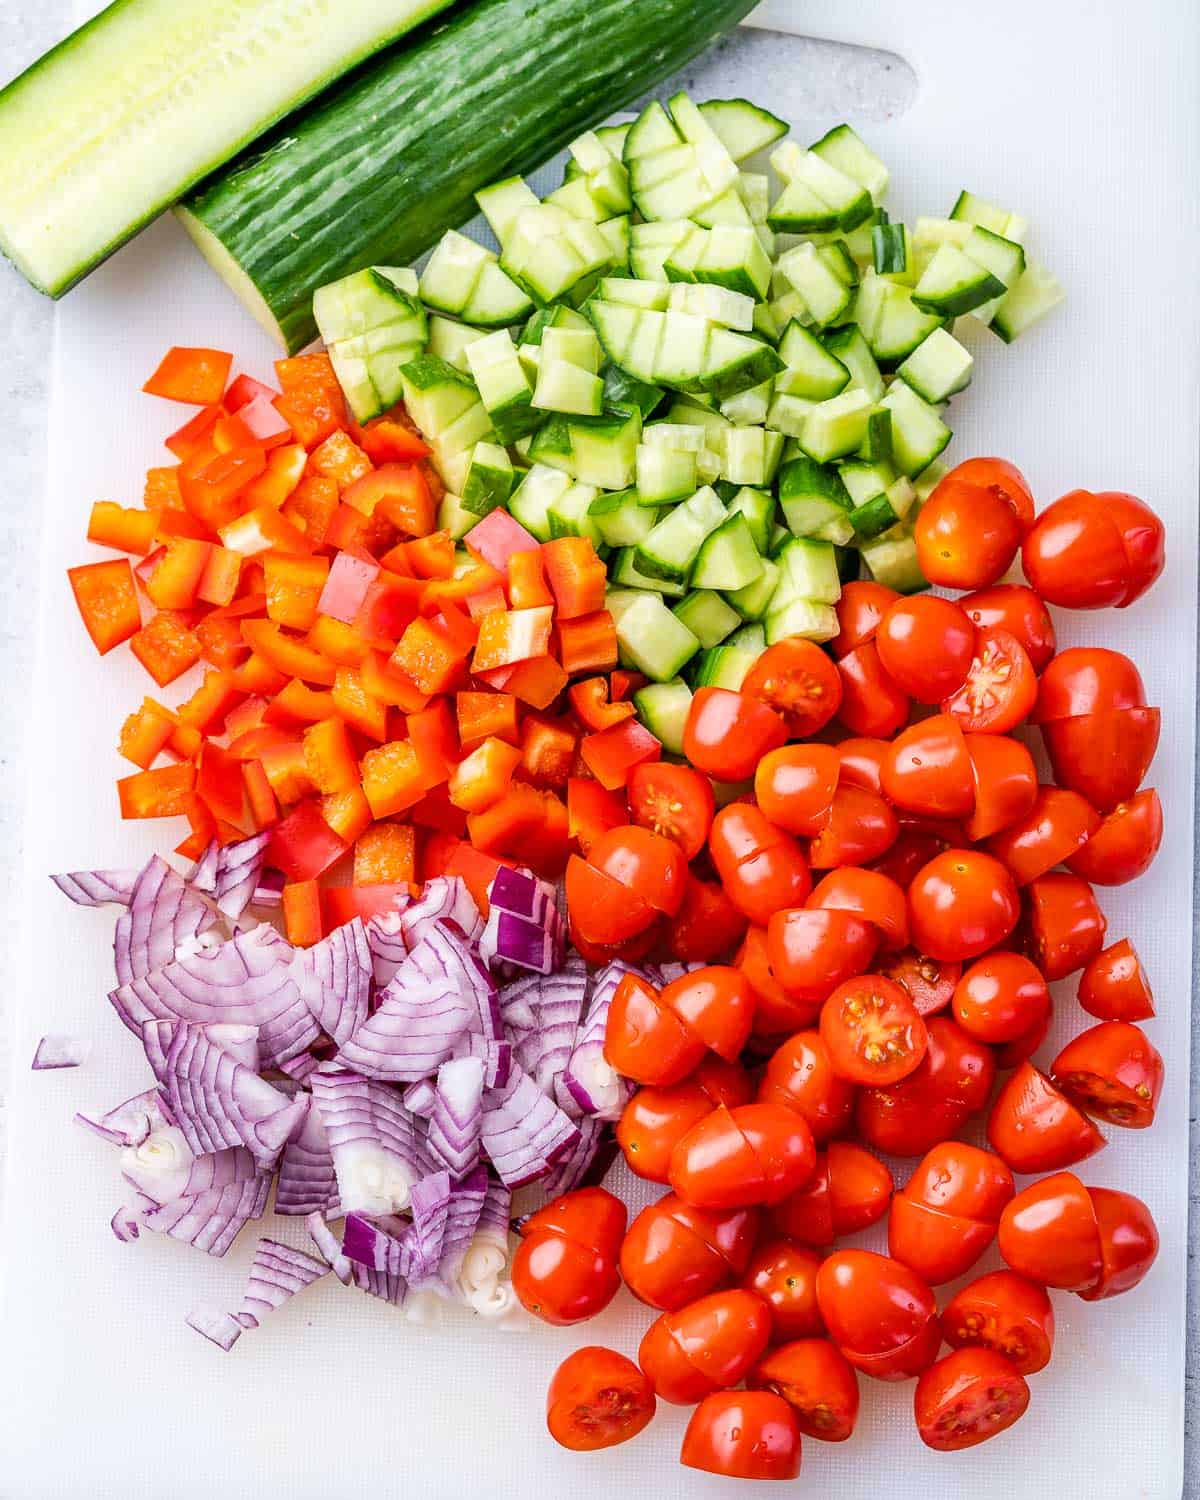 Chopped tomato, bell pepper, red onion and cucumber.